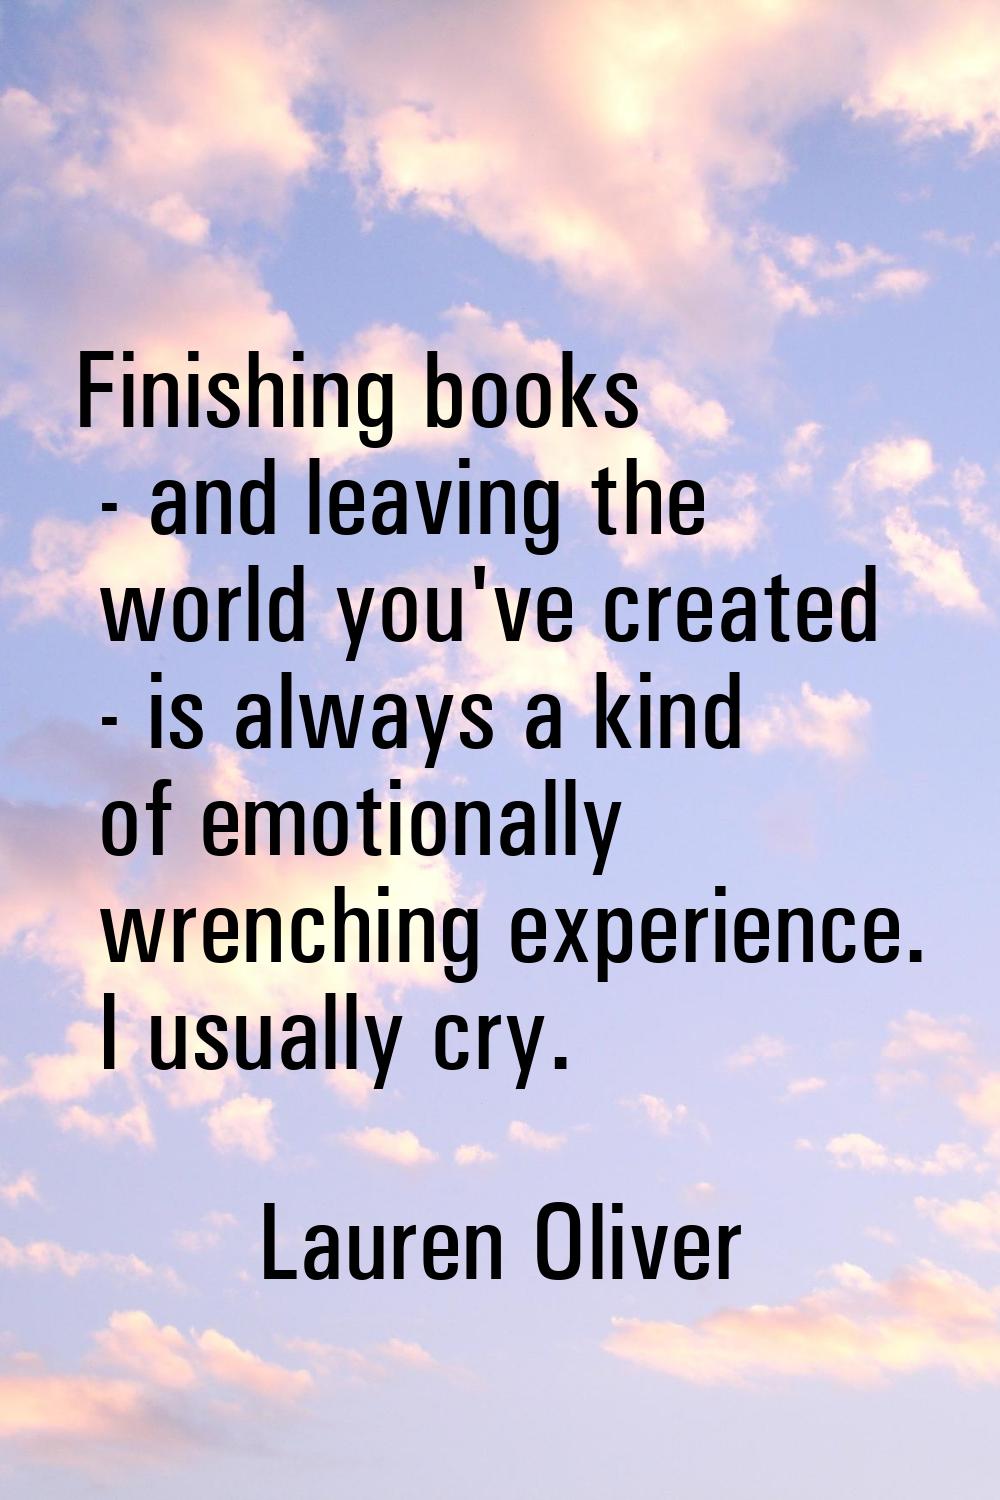 Finishing books - and leaving the world you've created - is always a kind of emotionally wrenching 